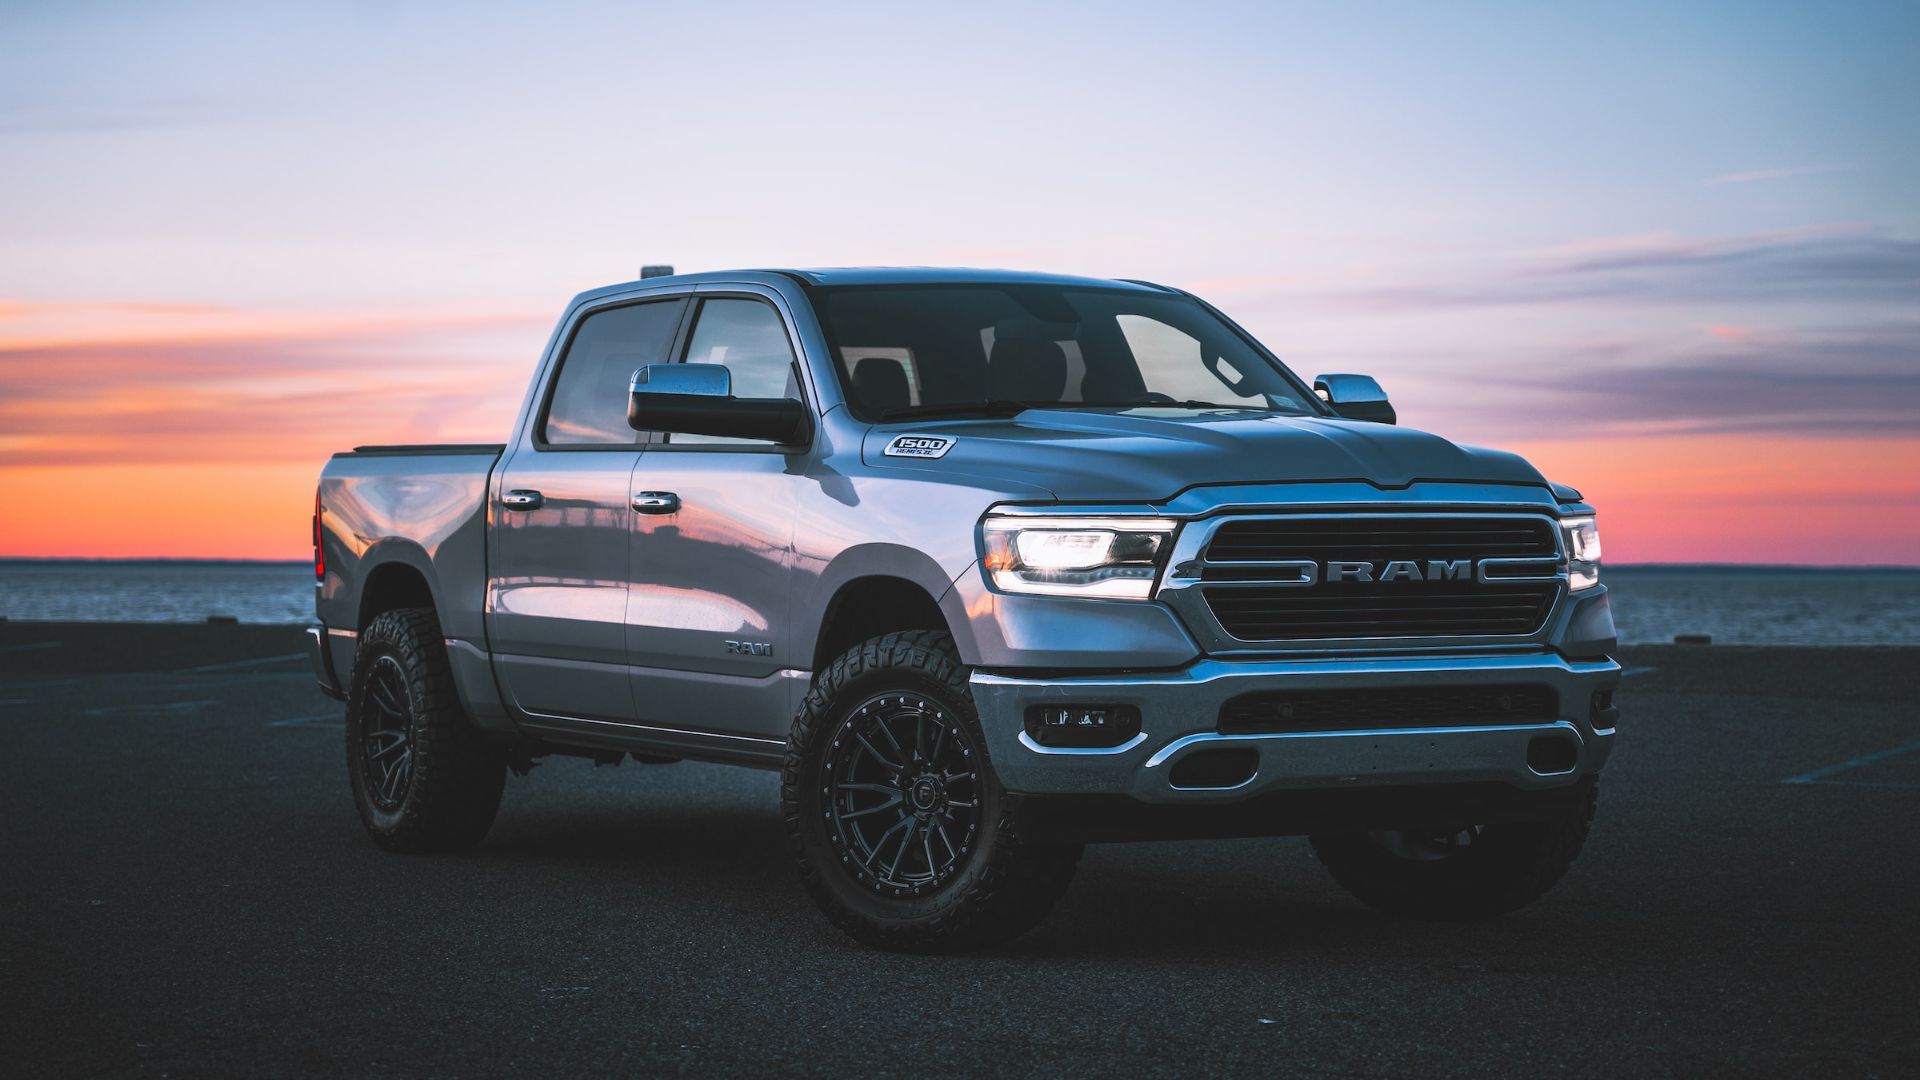 a silver ram truck parked in front of a sunset.